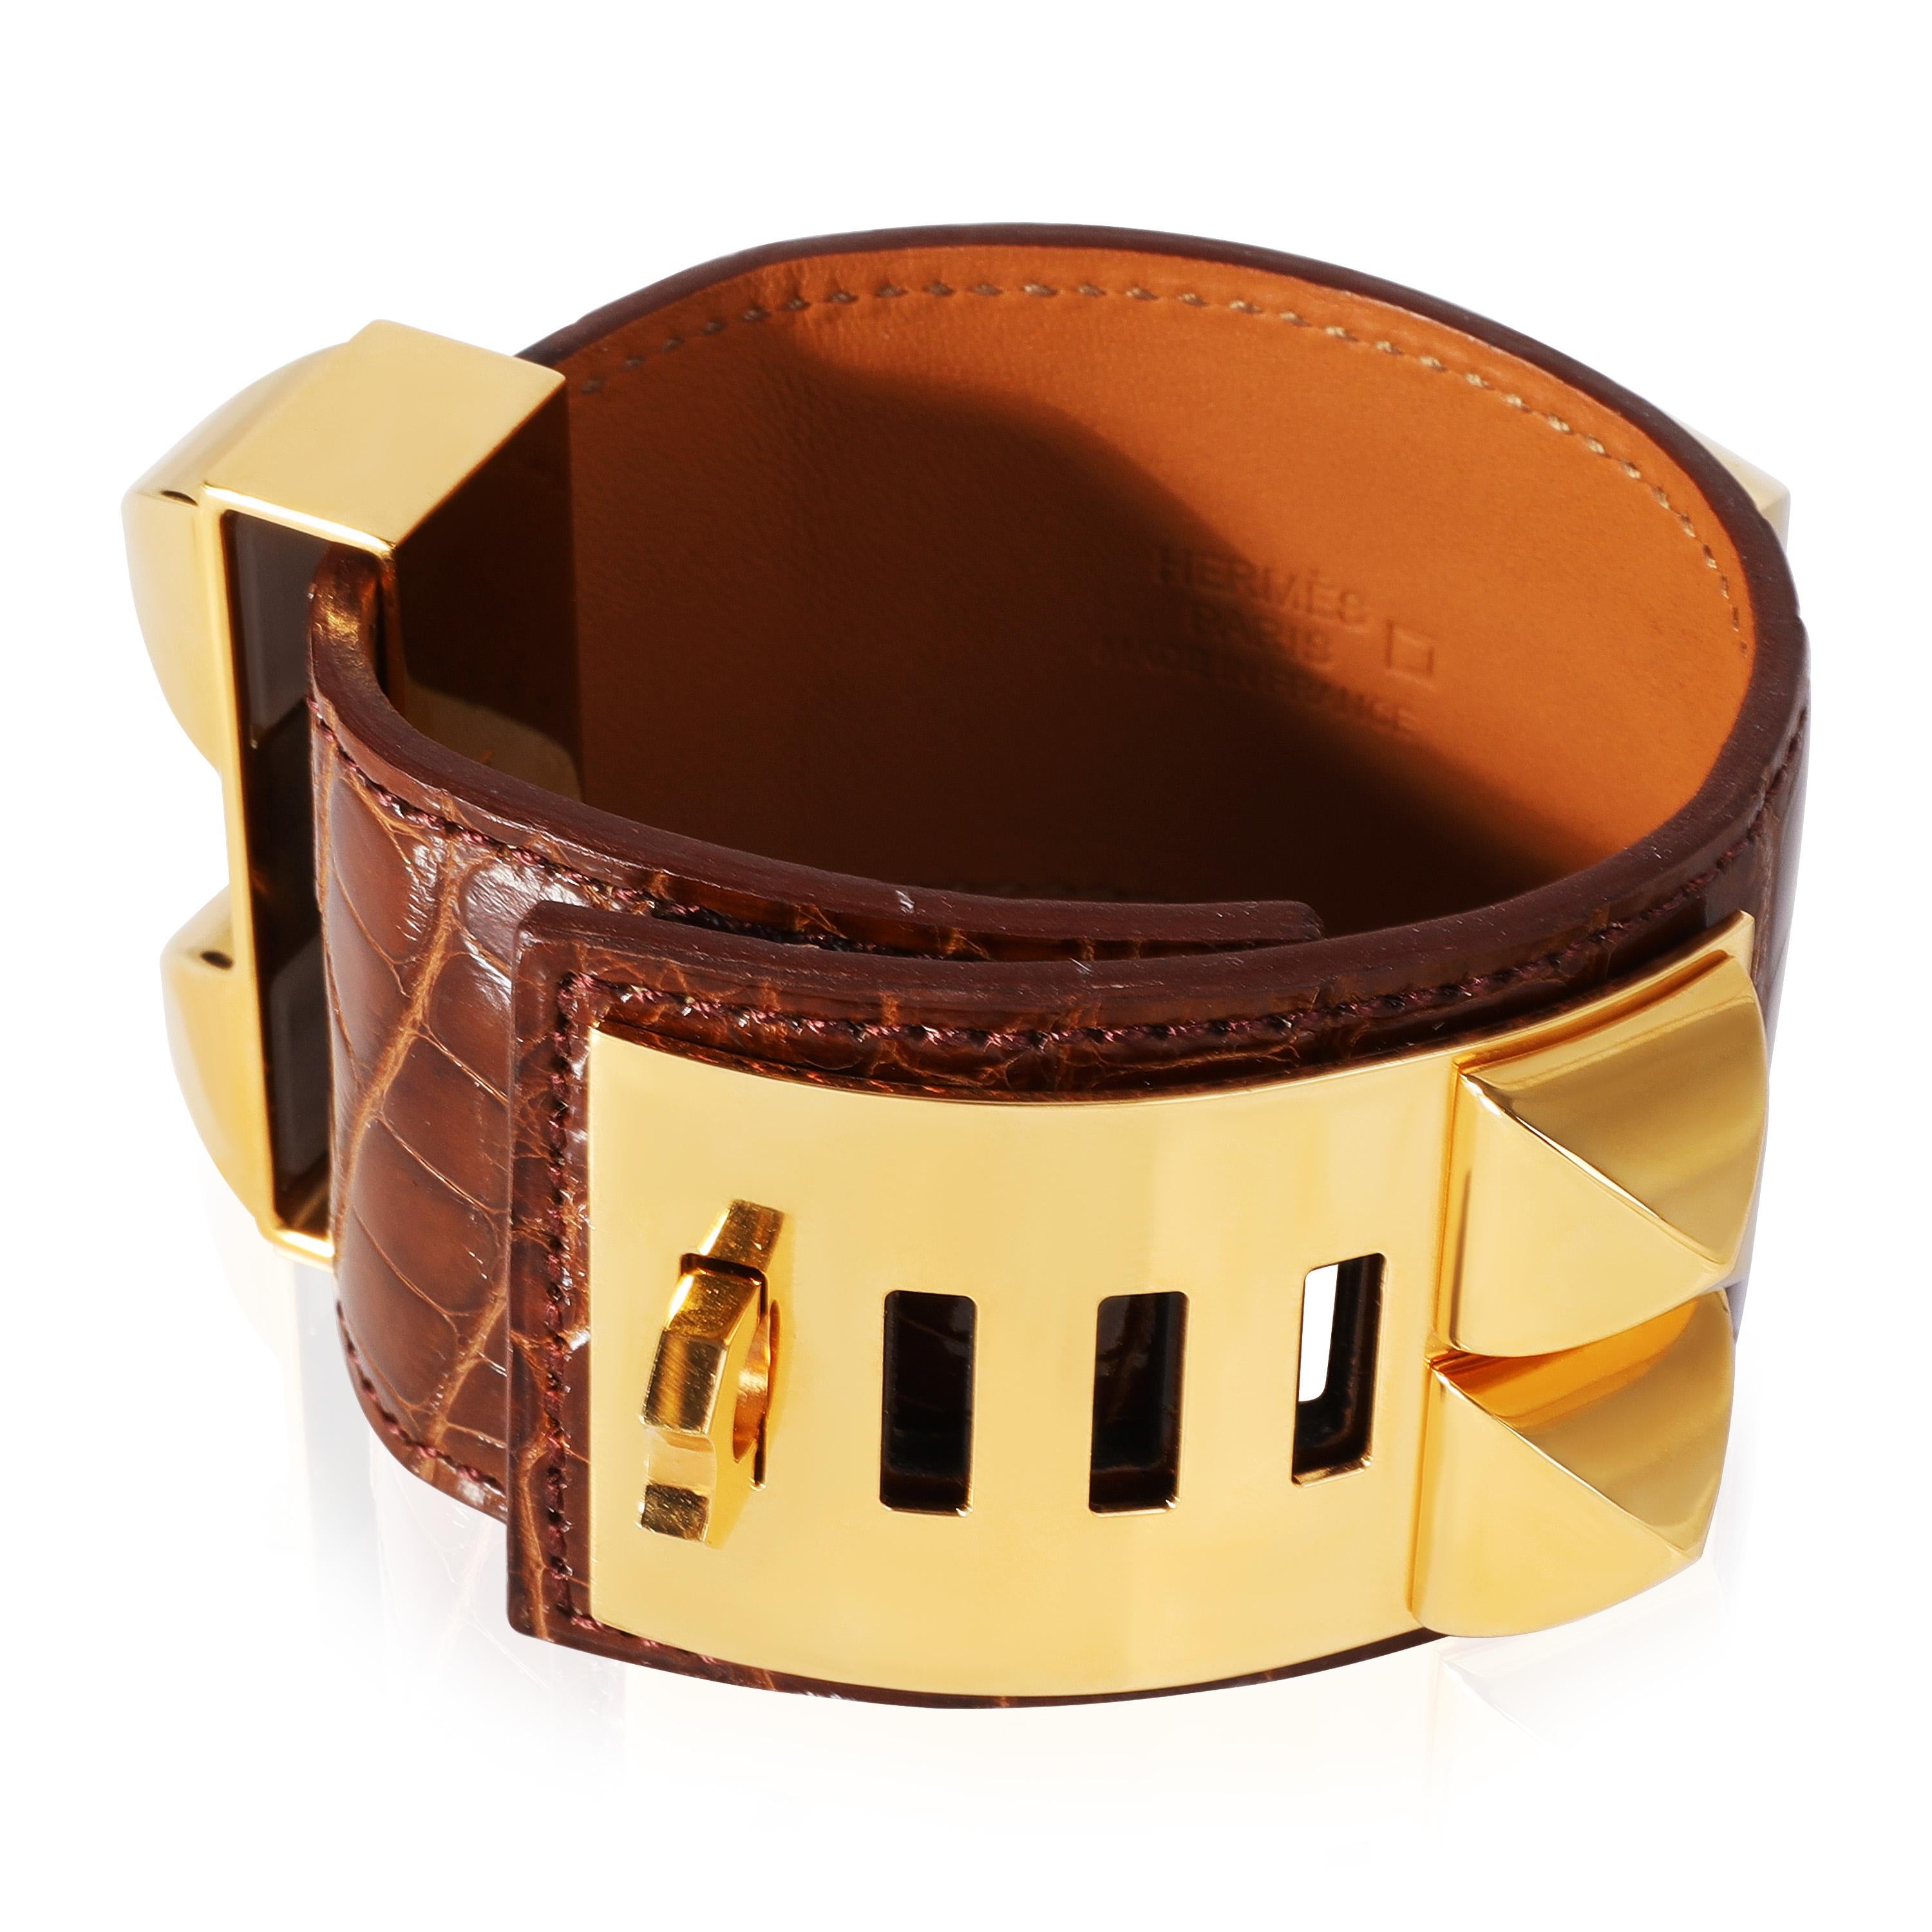 Hermes Collier De Chien Brown Leather Gold Tone Cuff

PRIMARY DETAILS
SKU: 120288
Listing Title: Hermes Collier De Chien Brown Leather Gold Tone Cuff
Condition Description: Retails for 2125 USD. In excellent condition. Length is adjustable.
Brand: